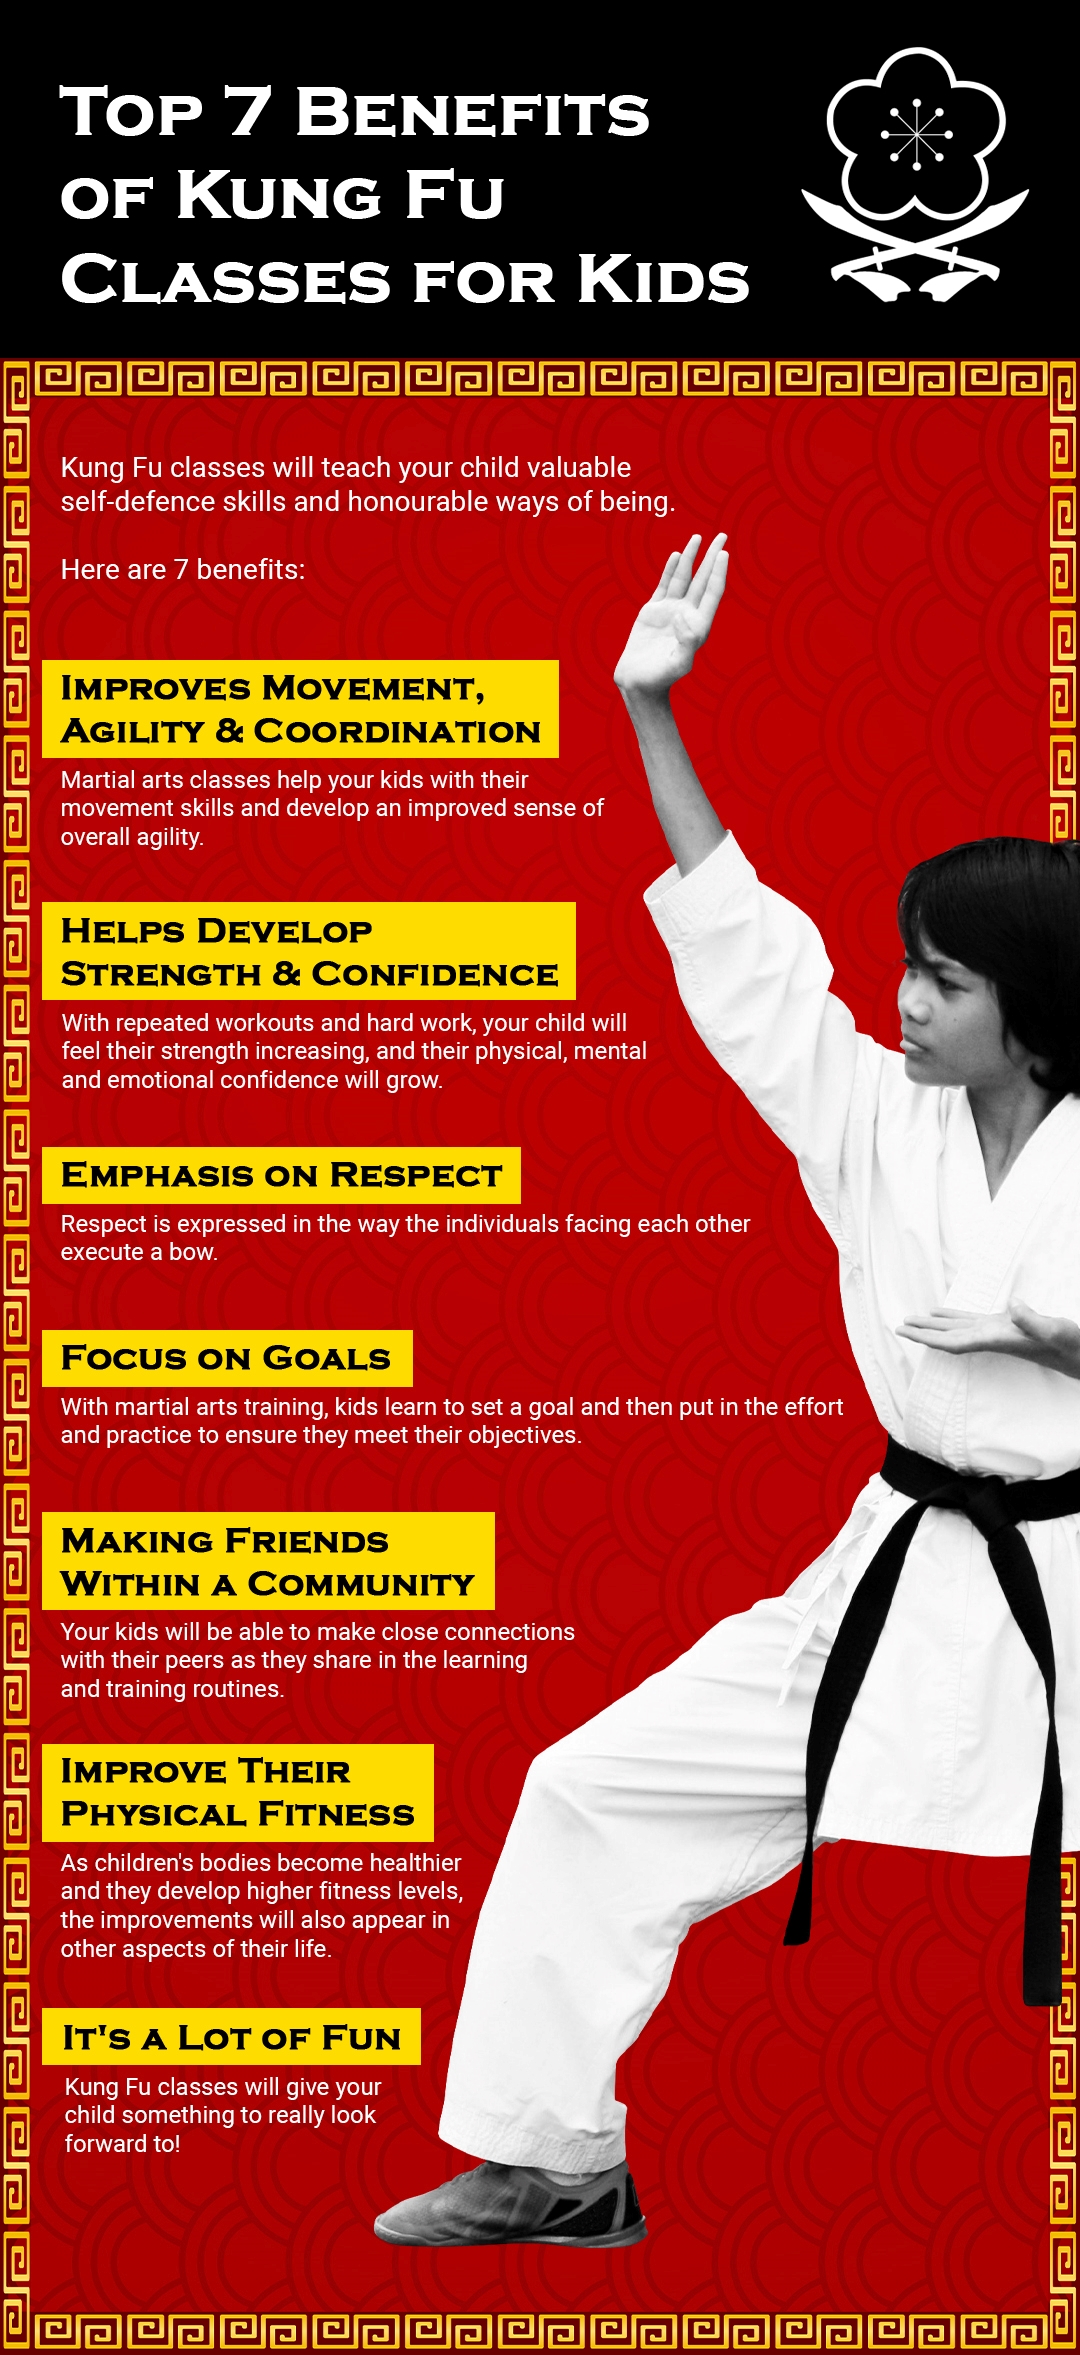 Top 7 Benefits of Kung Fu Classes for Kids